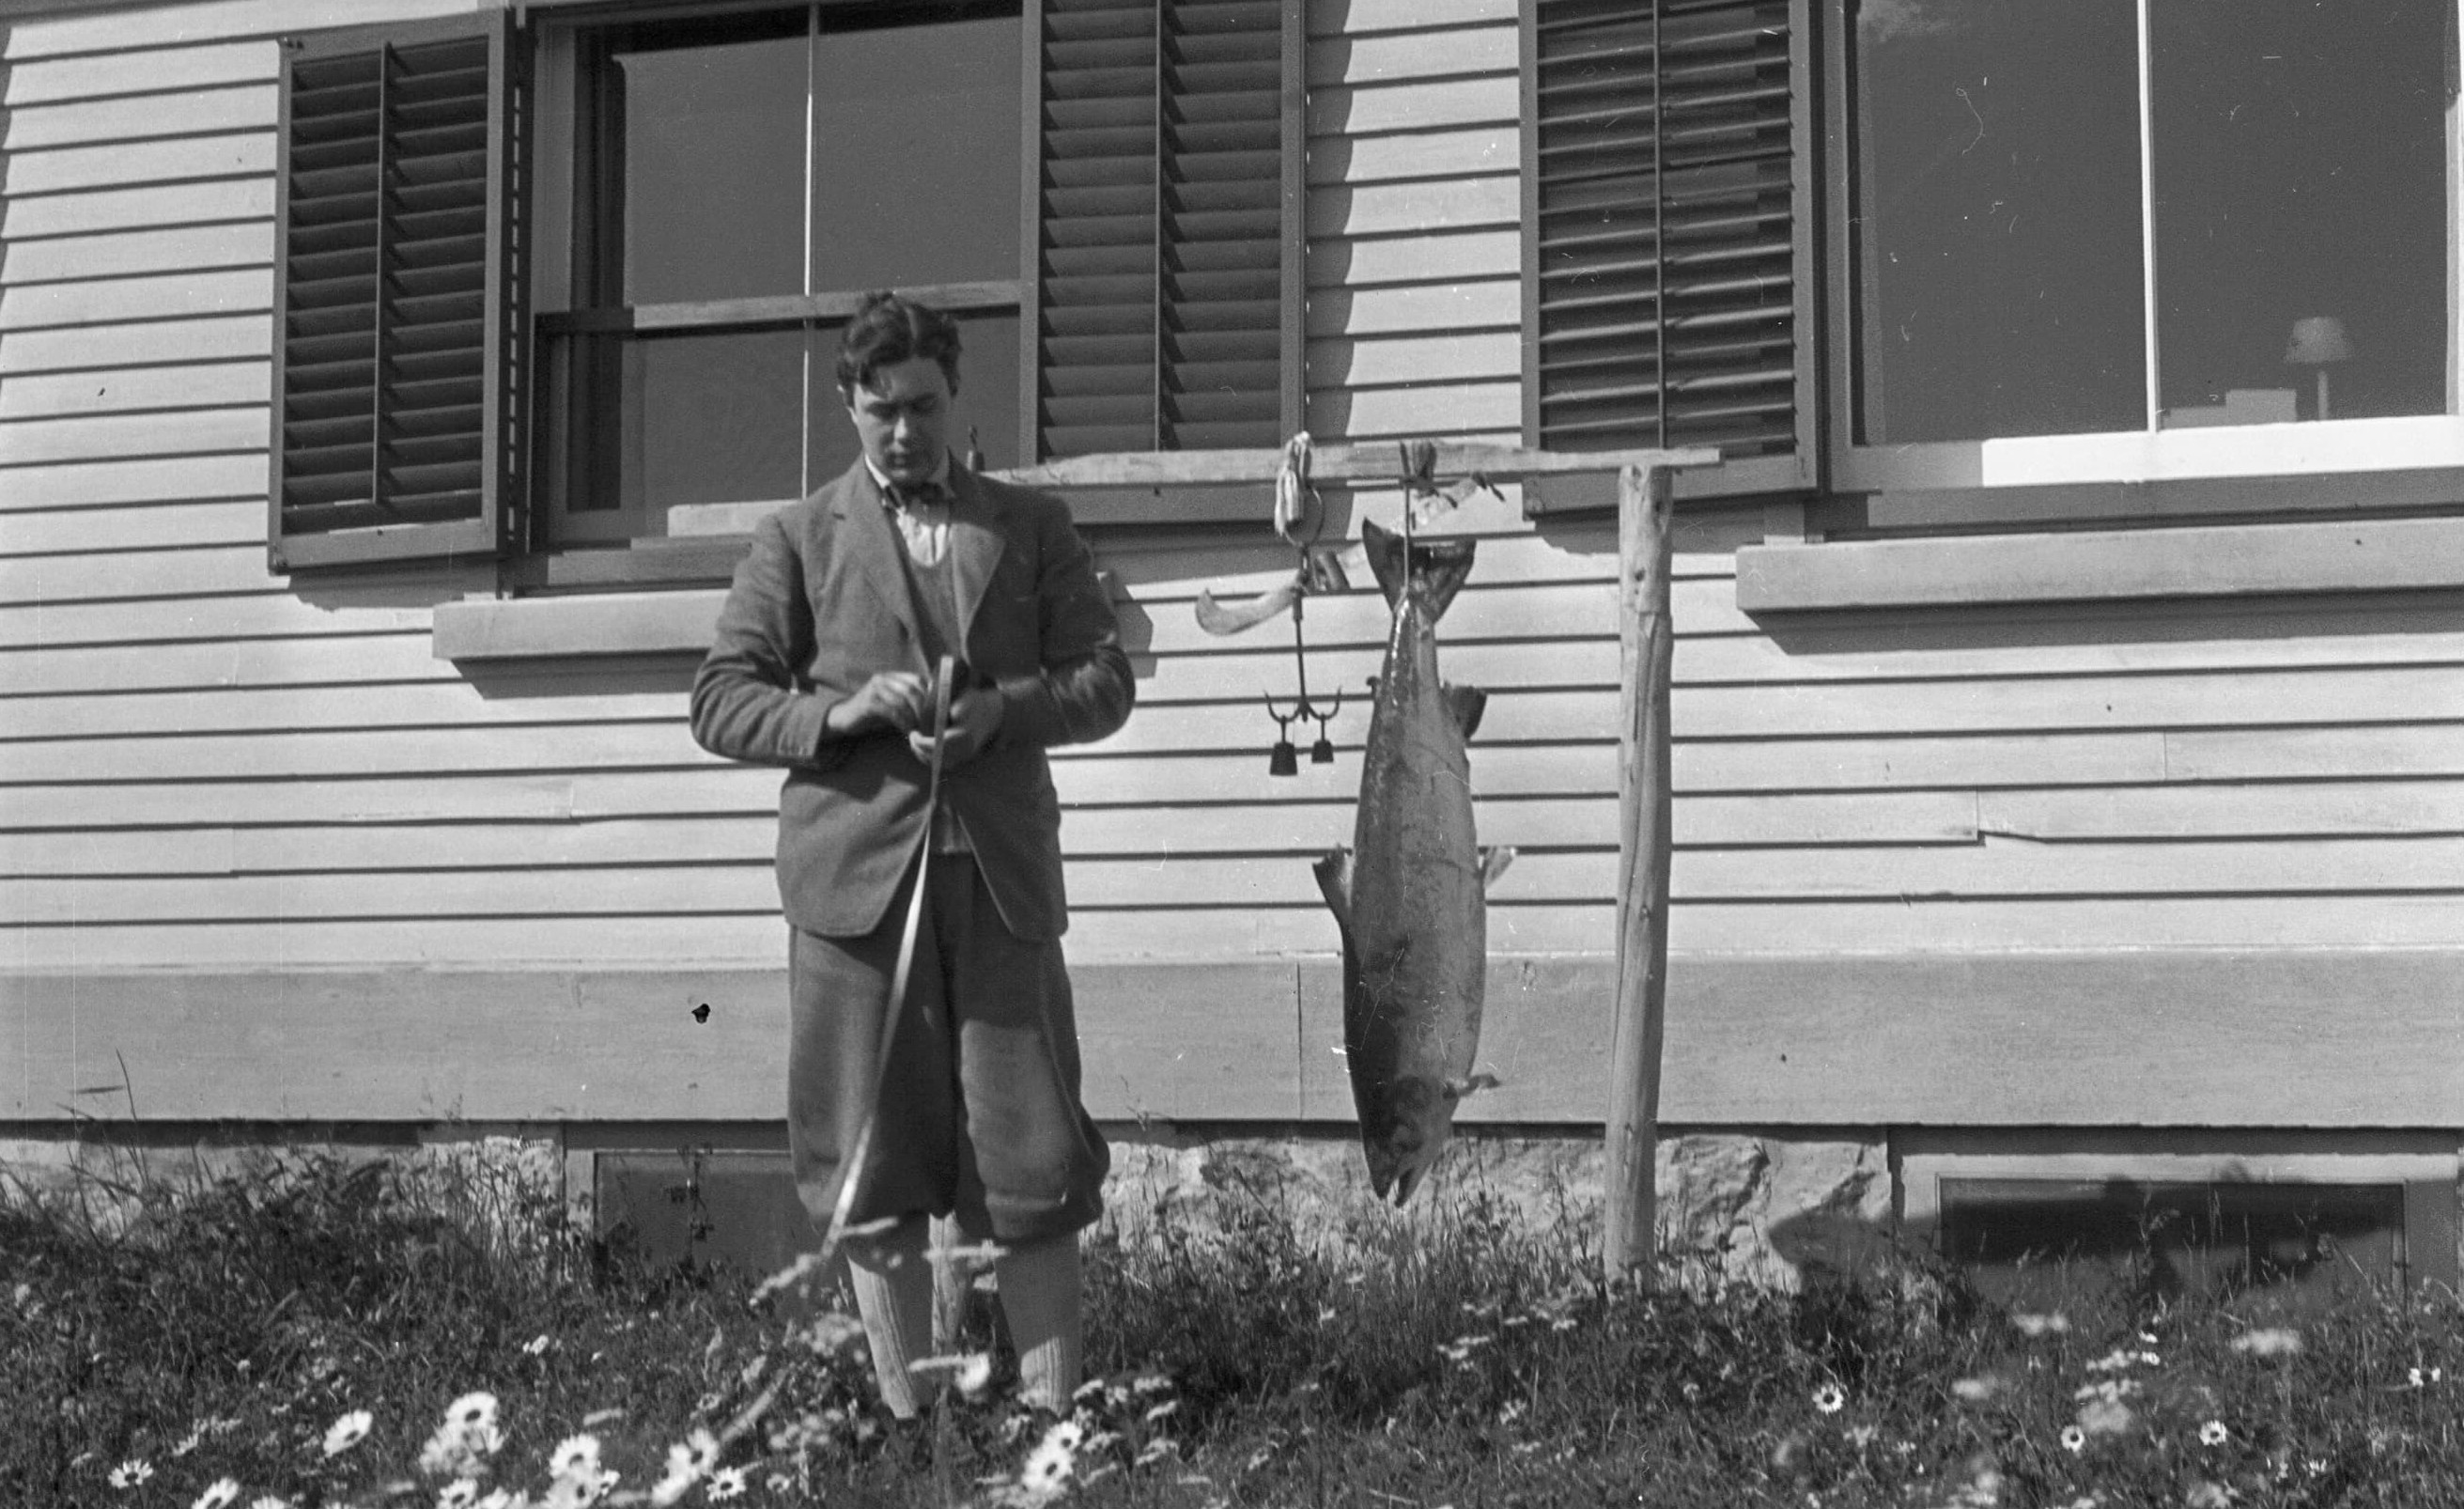 A young man rolls up a measuring tape beside an outdoor scale for weighing fish. A salmon is hanging from the scale.